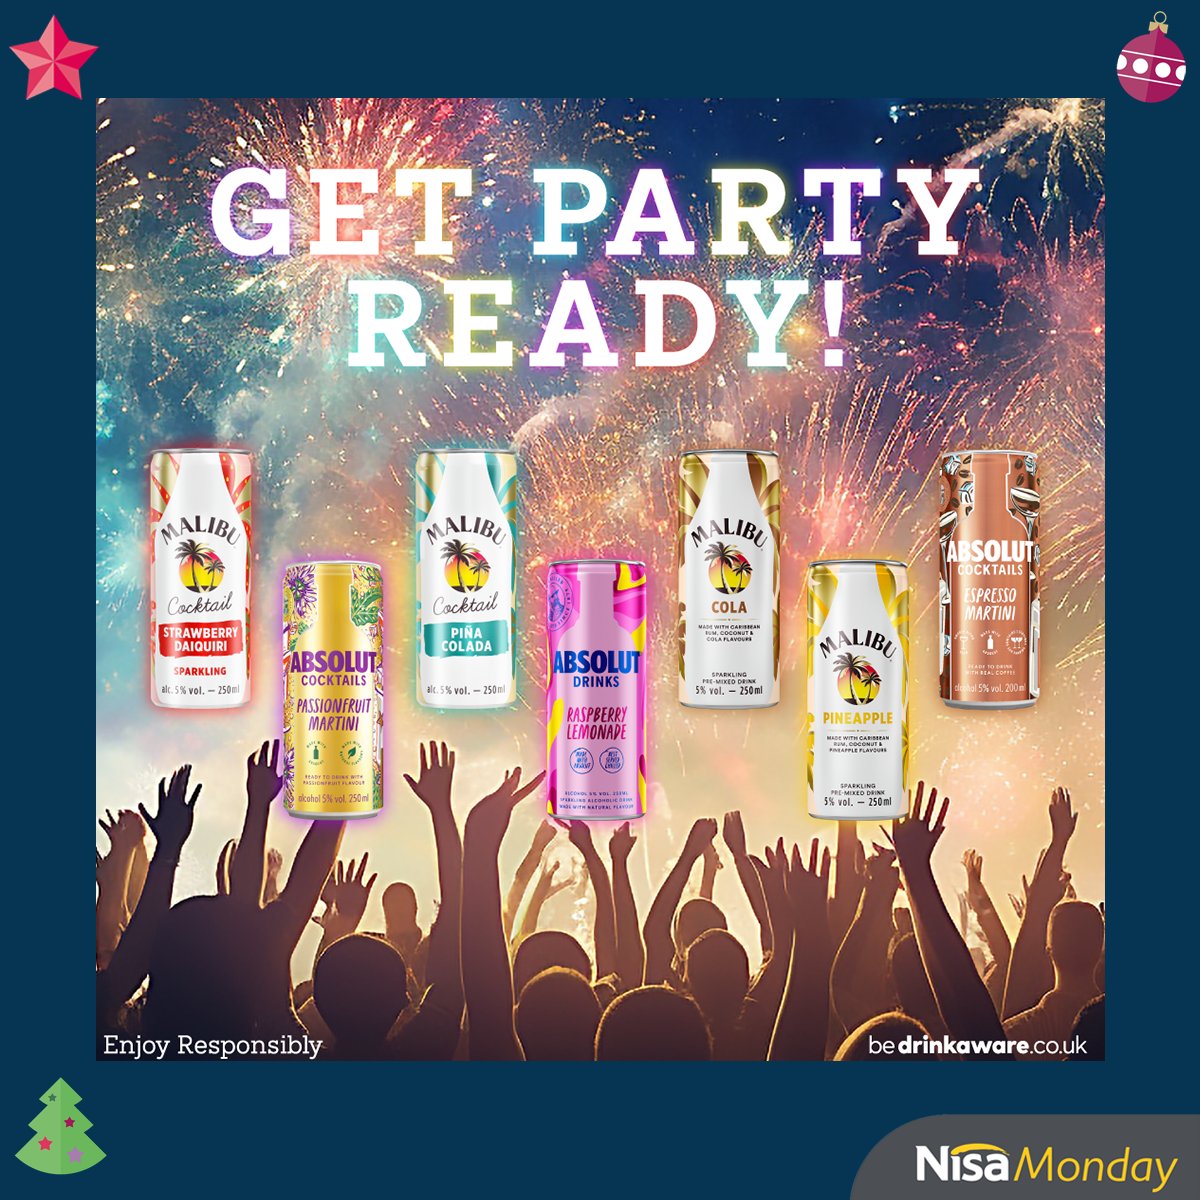 WIN with Malibu, Absolut and #NisaMonday this party season! RT+FOLLOW for your chance to WIN! T&C's: spr.ly/6010RZKFn Closes: 31.12.23